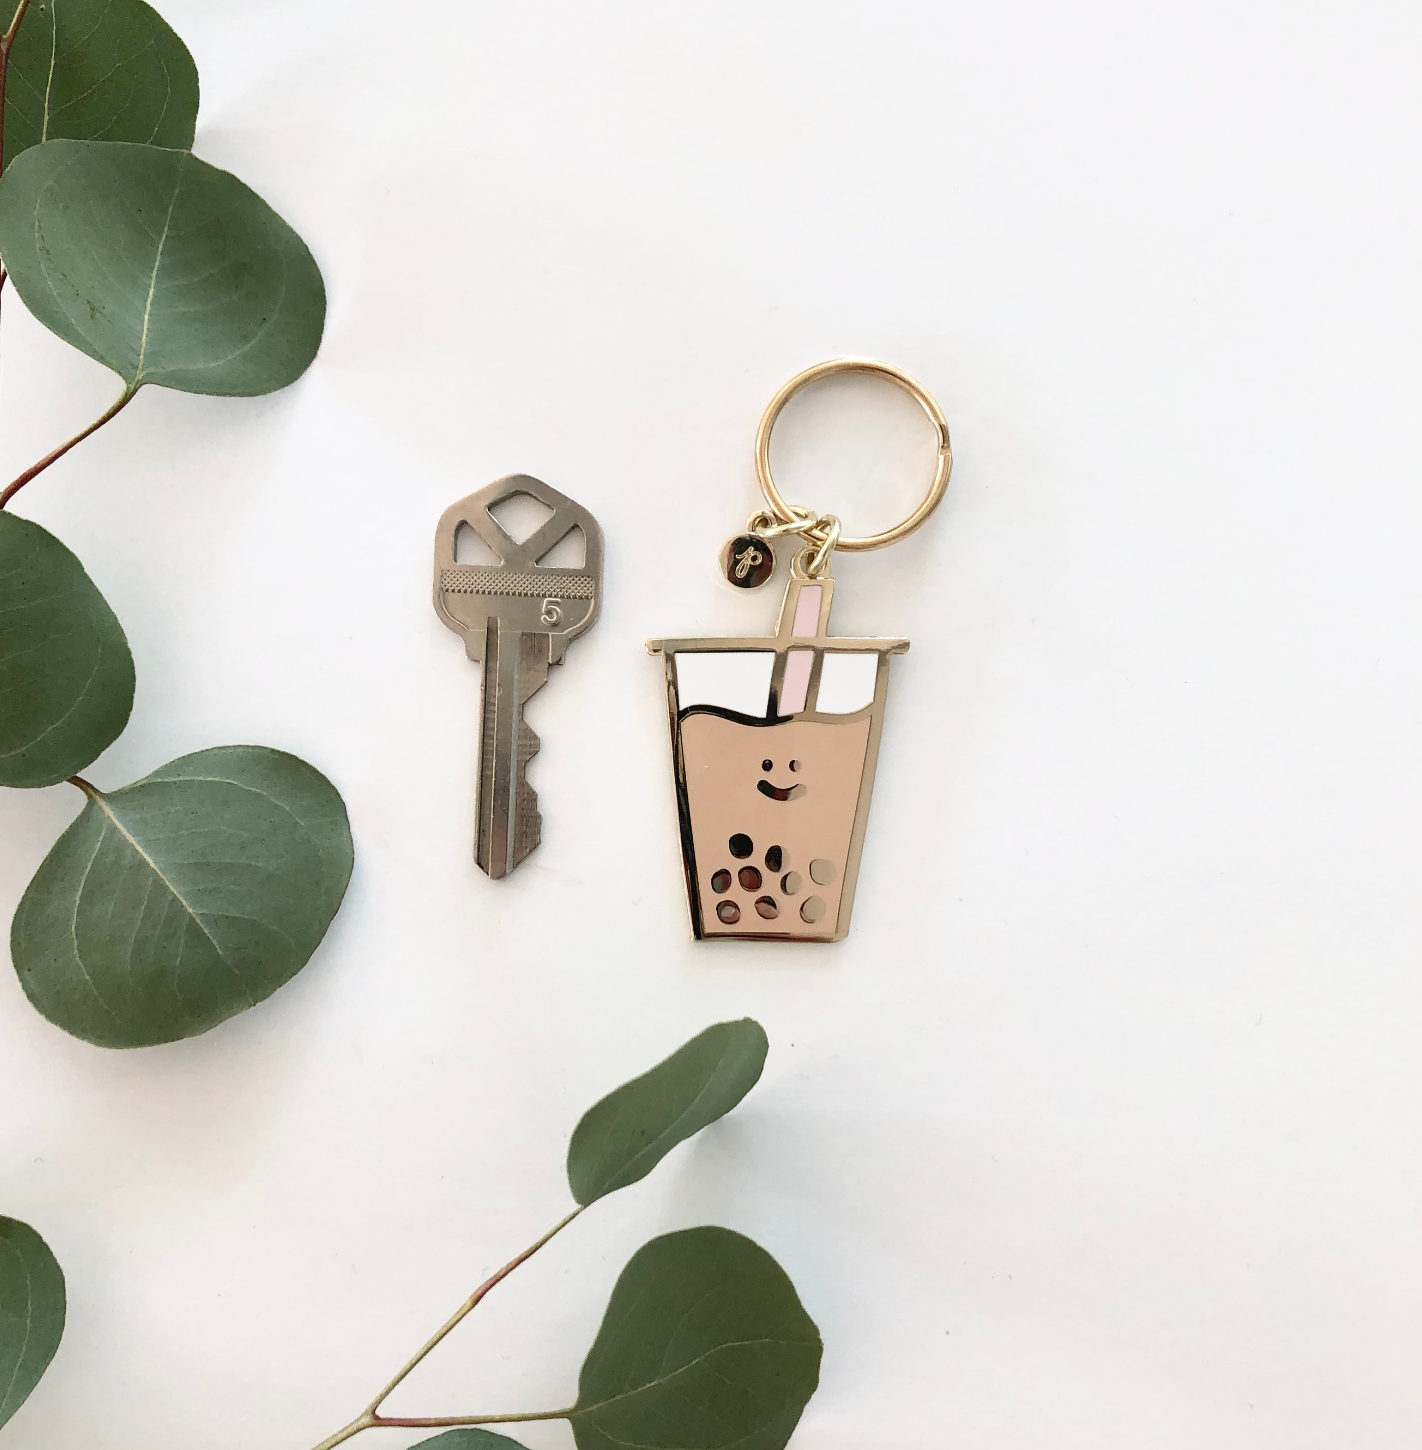 Photo of Boba Keychain with teal colored straw. Shown next to a house key for size.